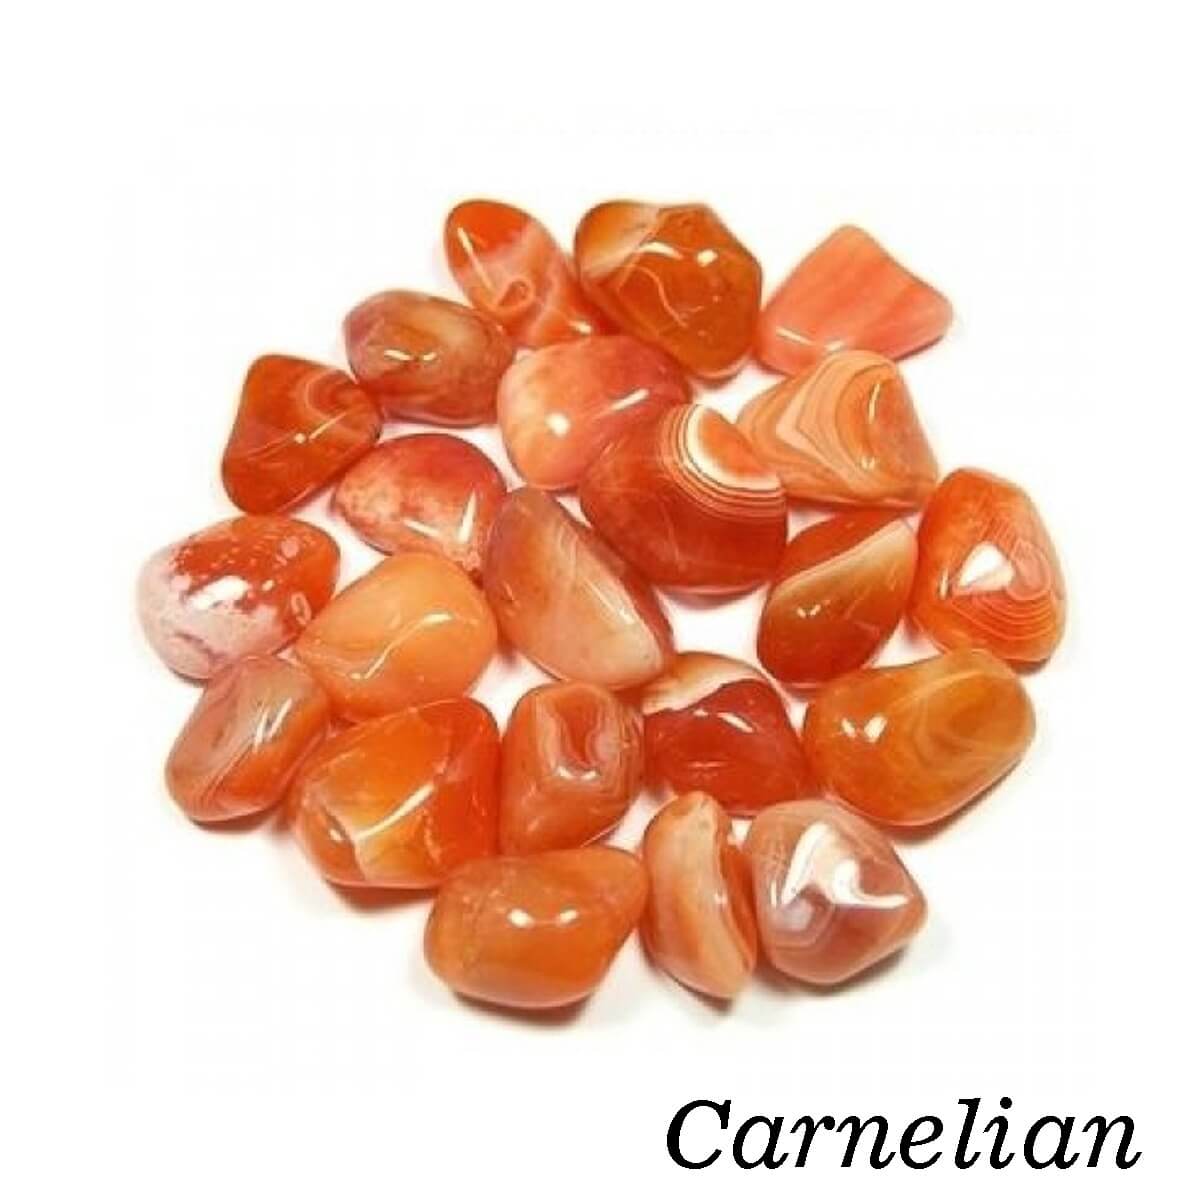 Natural Carnelian Crystal Tumbles Stone for Healing & Crystal Healing Tumbled Stones (Pack of 100 Grams Approx)